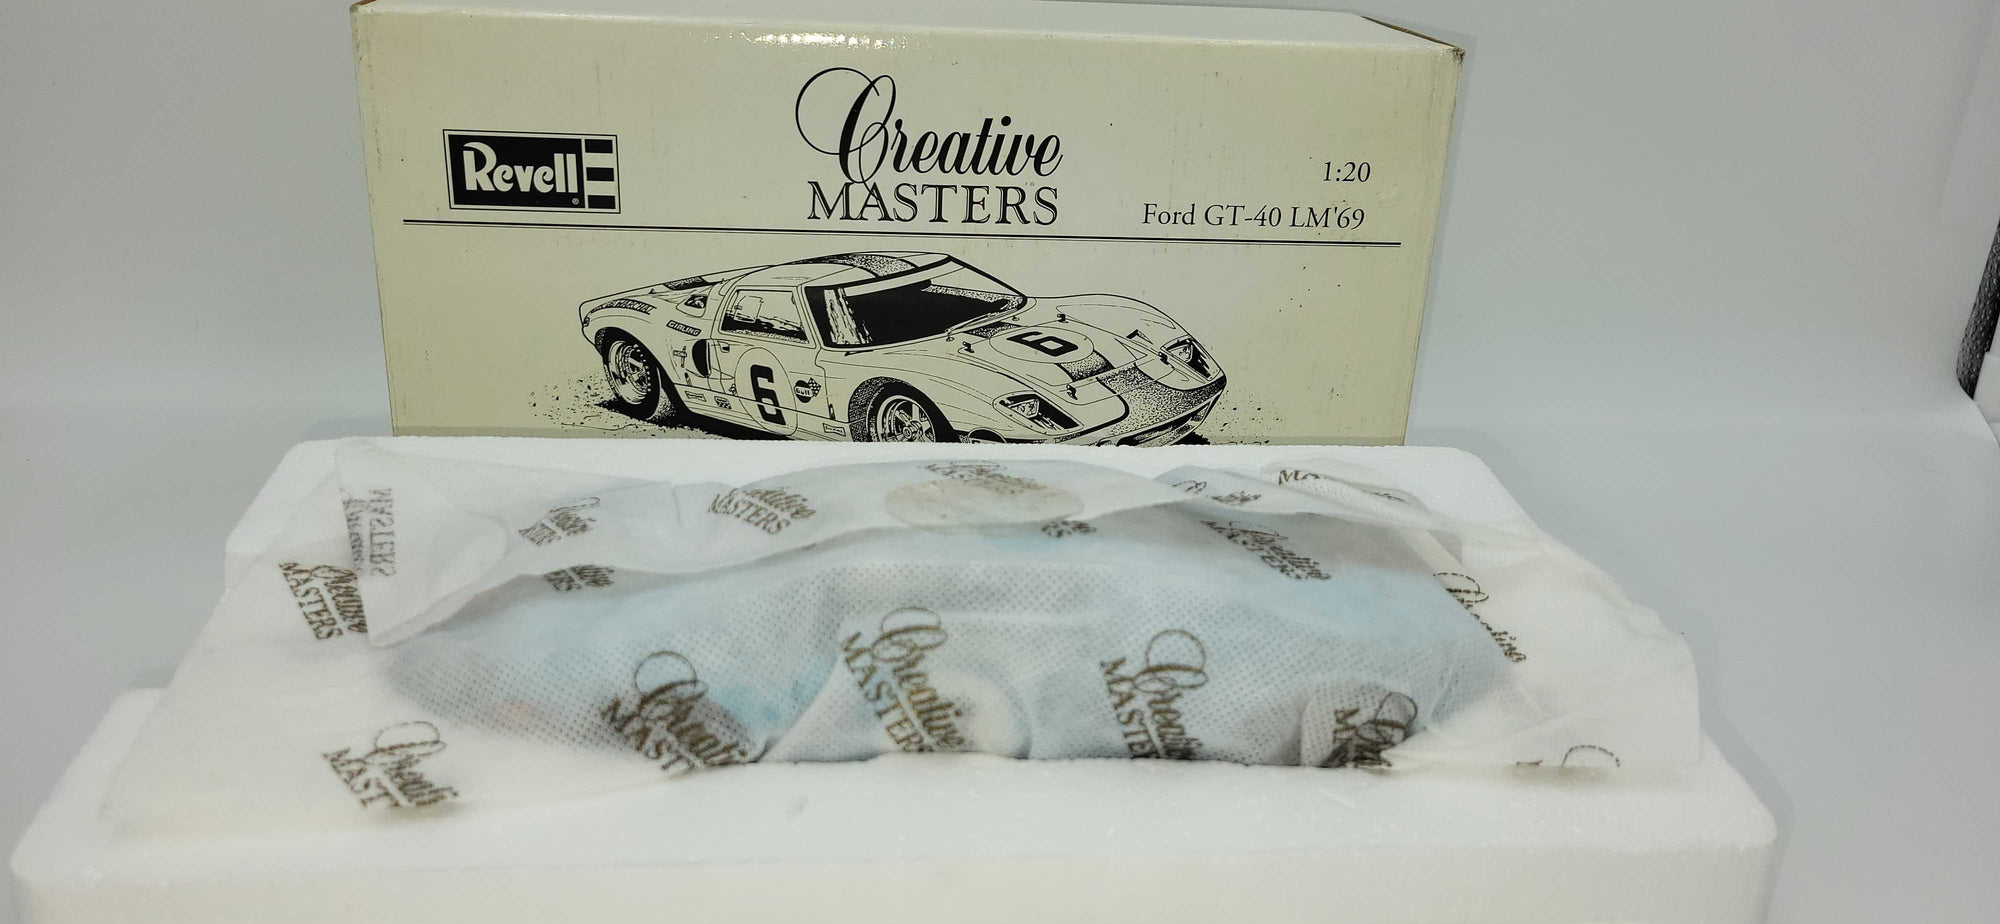 Revell Creative Masters 1/20 Ford Gt-40 Lm 1969 08673-9090